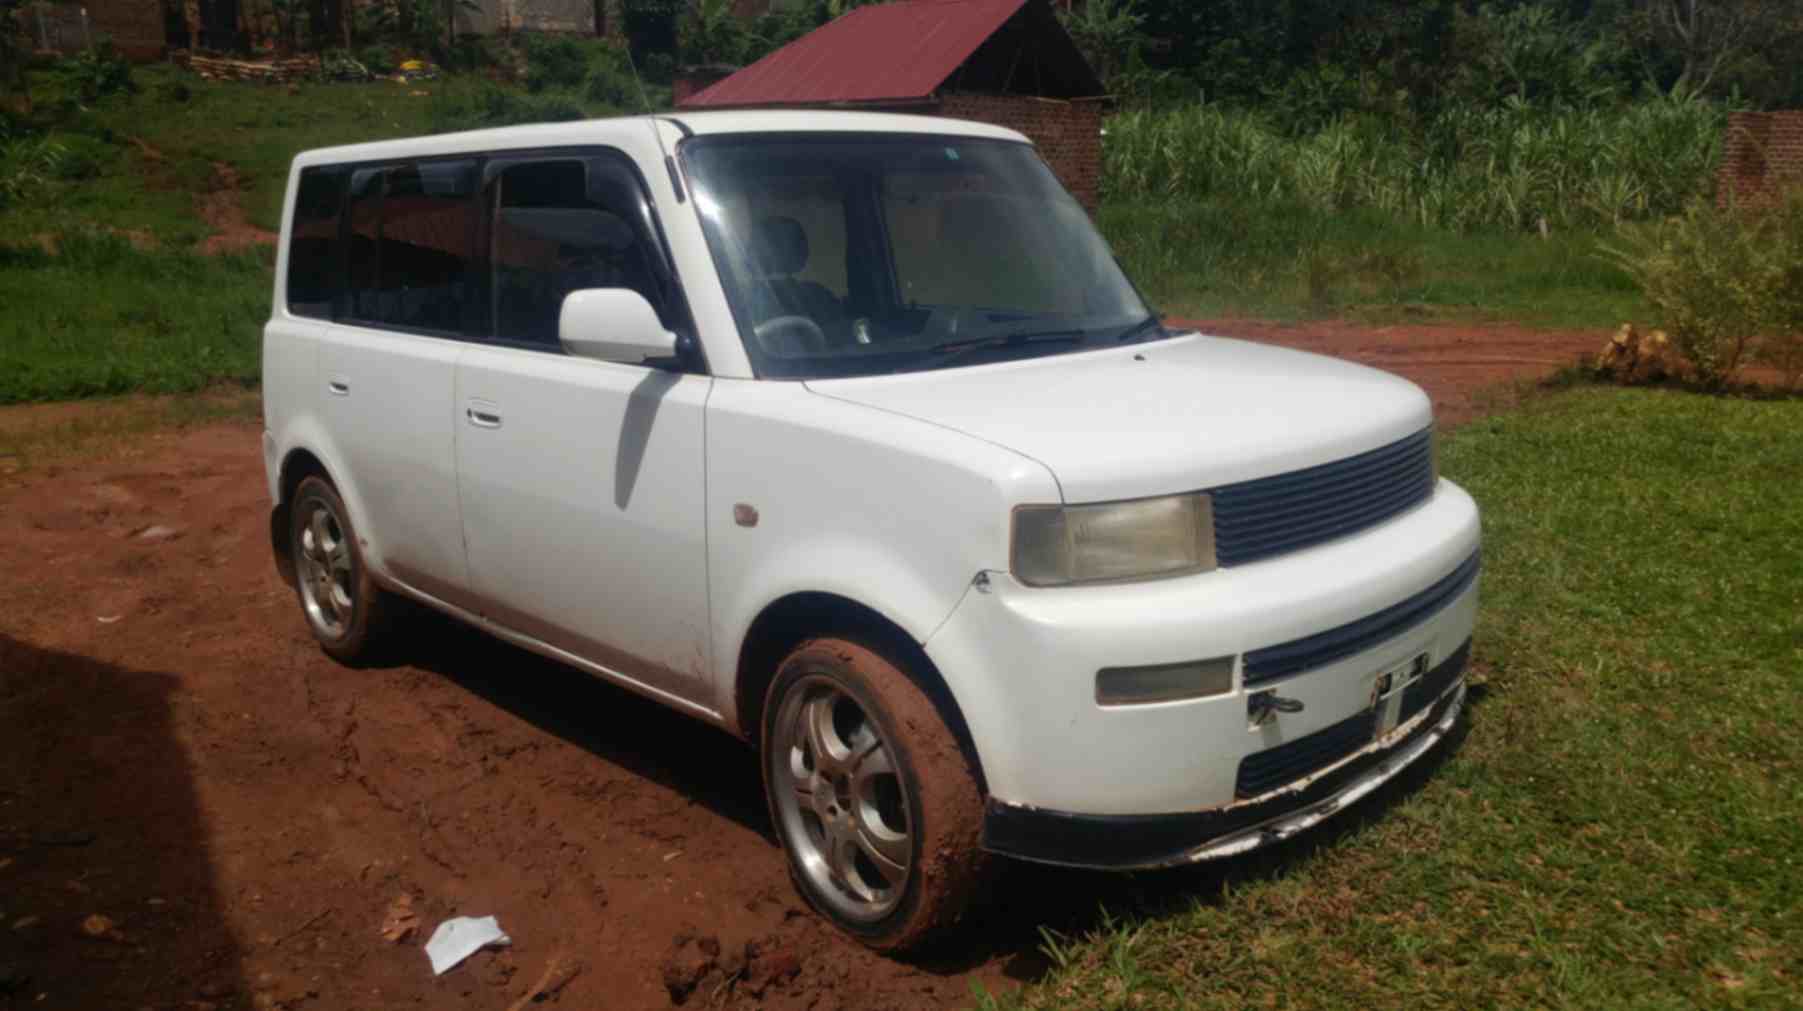 Toyota Bb for sale Model 2001